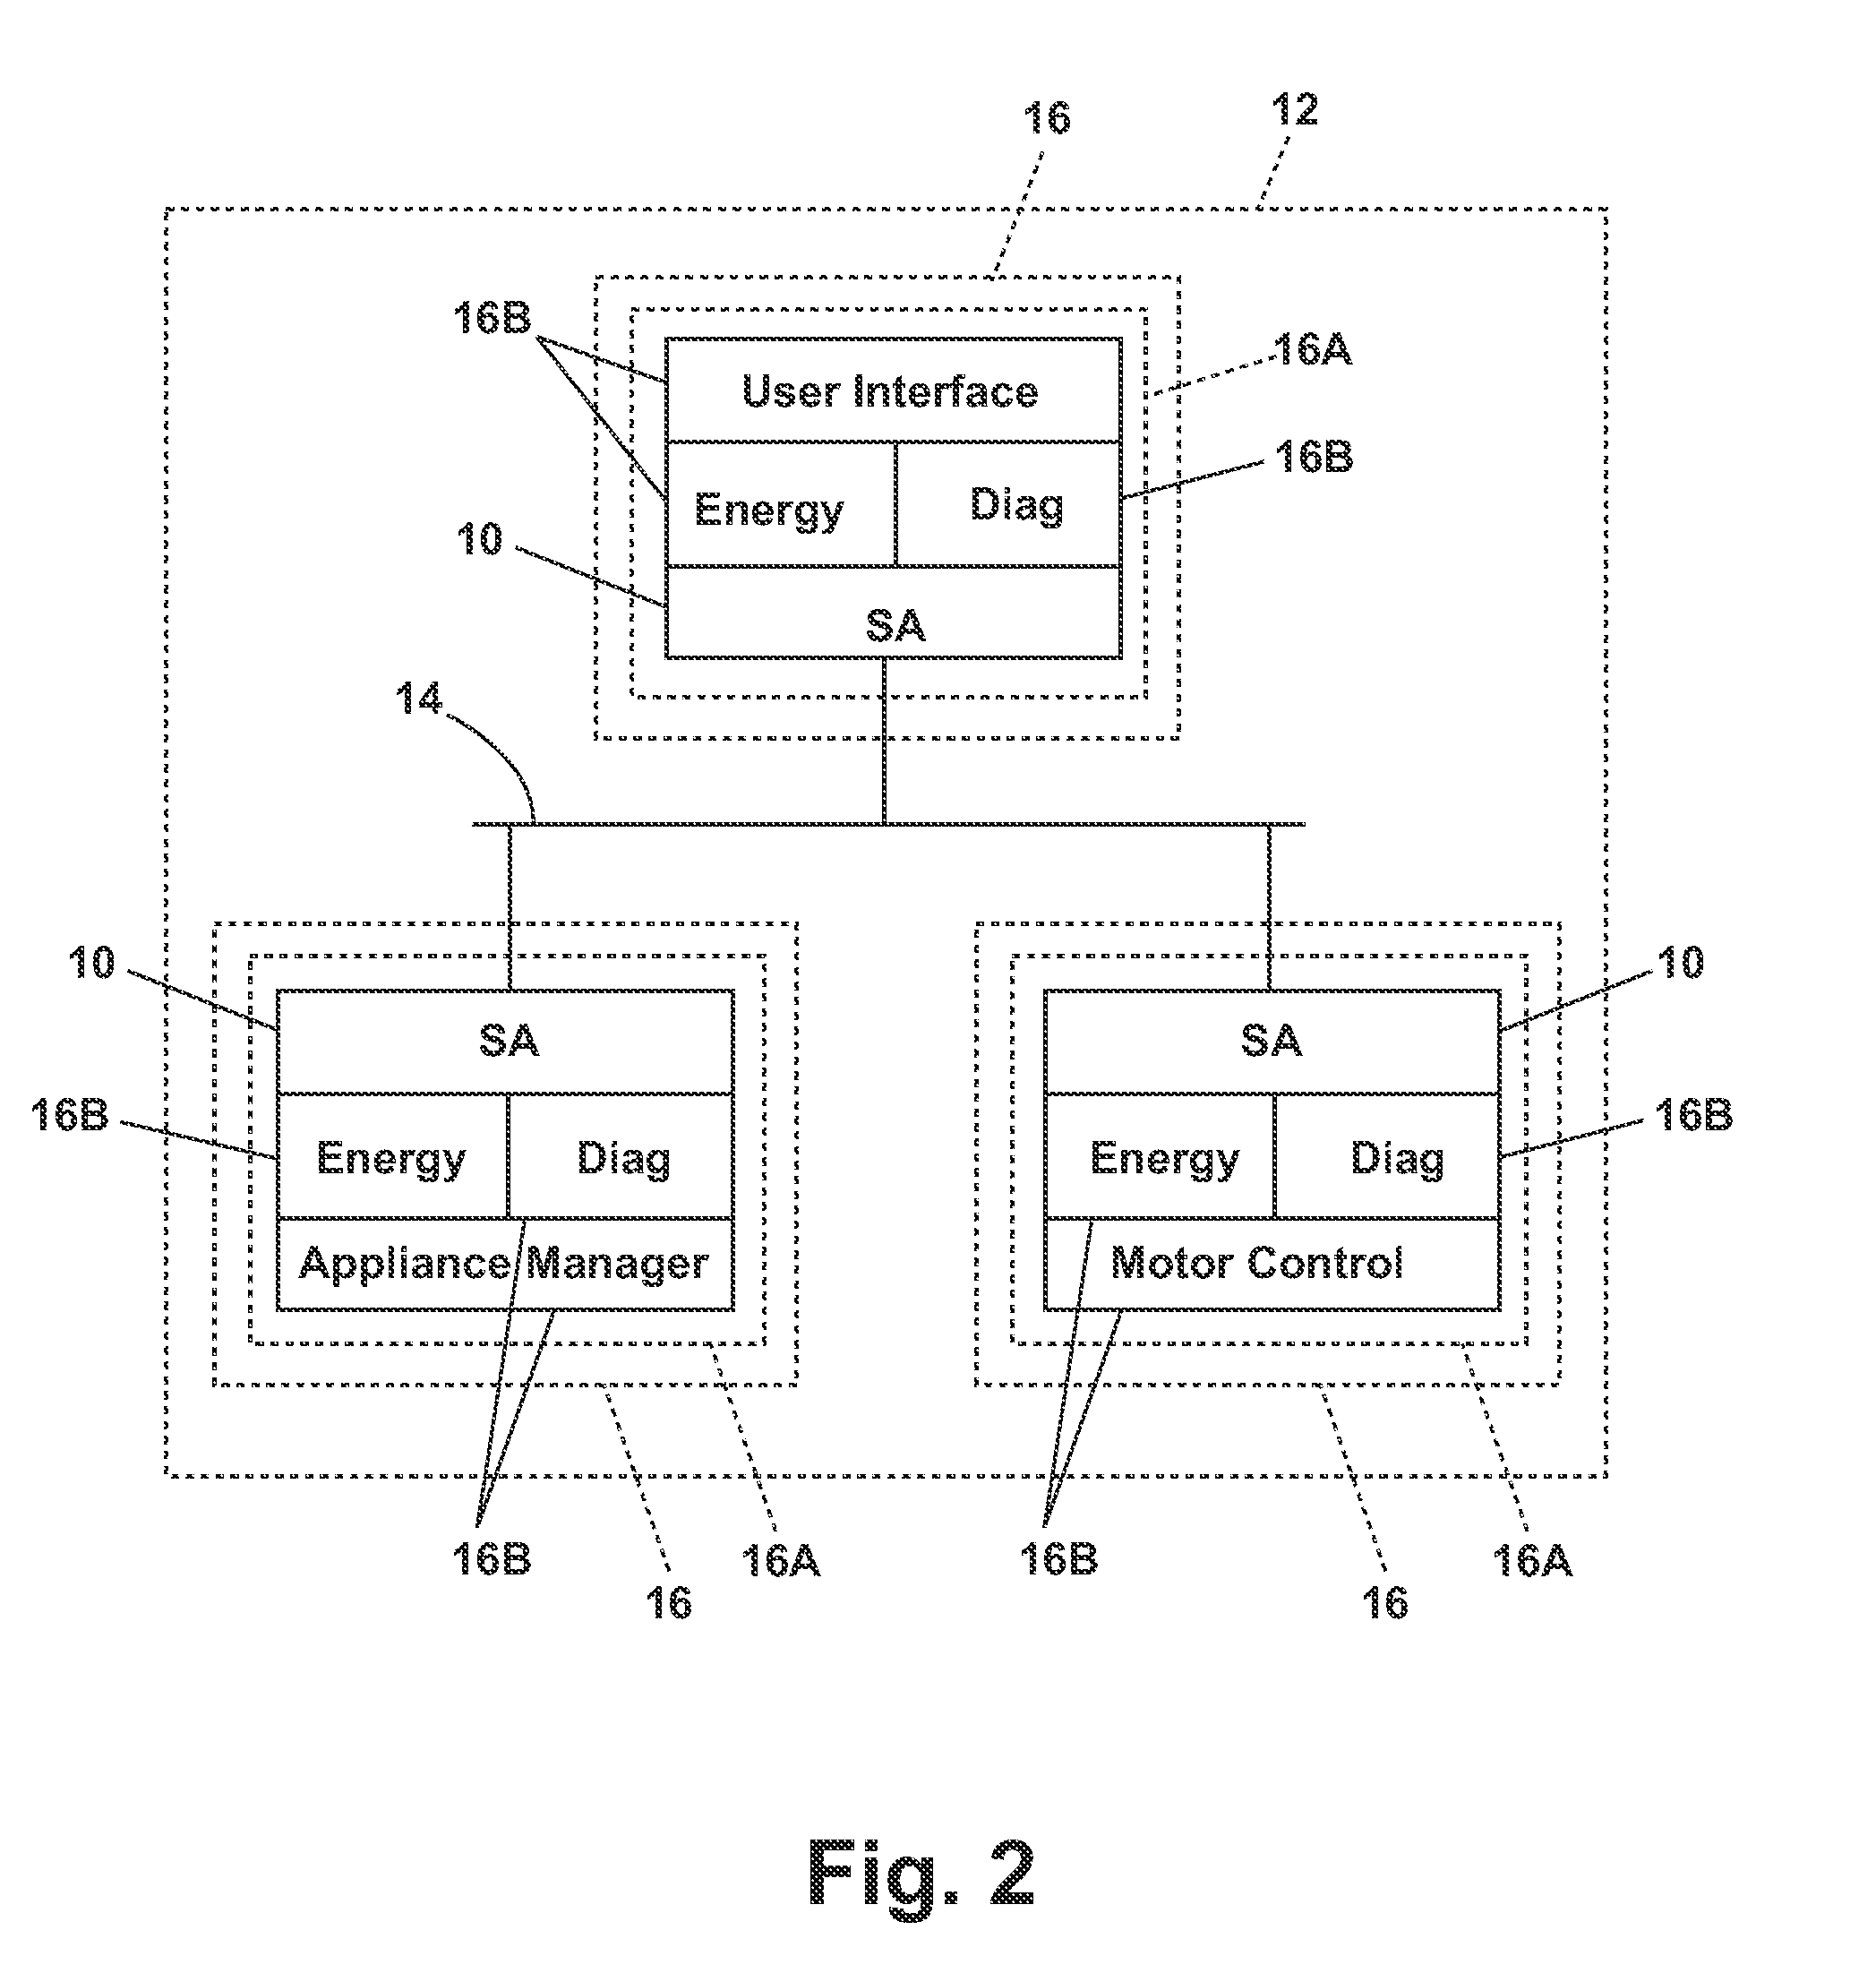 Software architecture system and method for operating an appliance in multiple operating modes